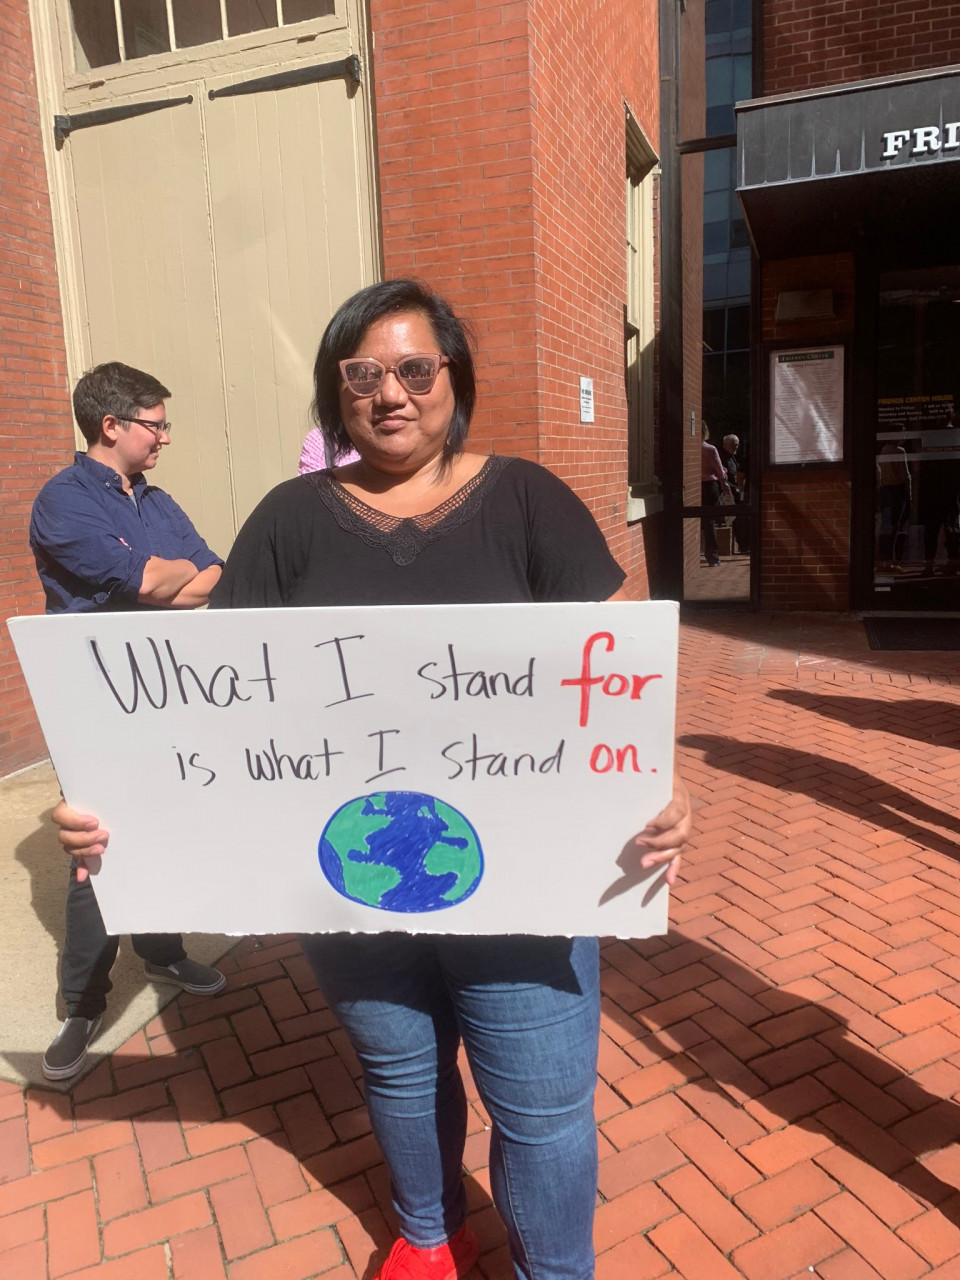 <a class="bx-tag" rel="tag" href="https://wethepeople.care/page/view-channel-profile?id=937"><s>#</s><b>climatestrike</b></a> - <a class="bx-tag" rel="tag" href="https://wethepeople.care/page/view-channel-profile?id=217"><s>#</s><b>philly</b></a> - What I stand for is what I stand on.